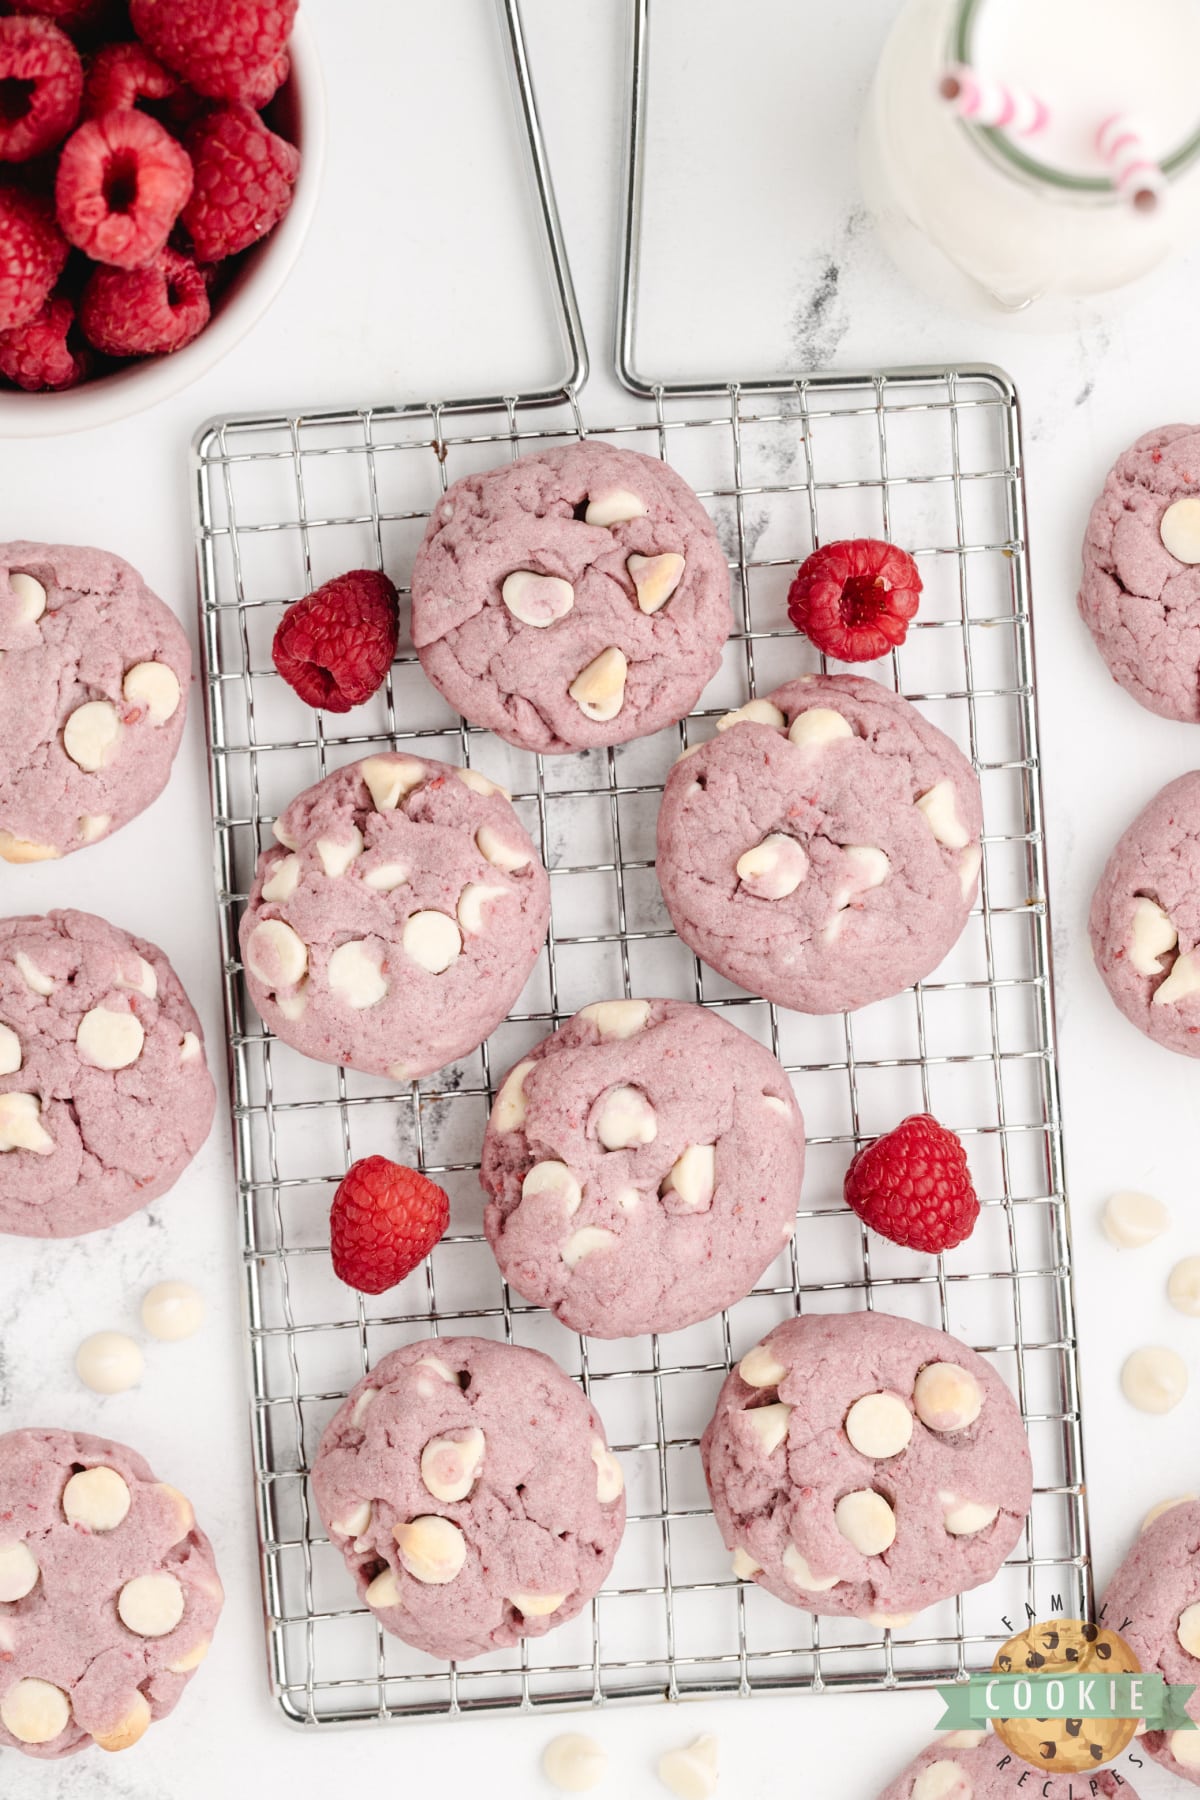 Cookies made with raspberries and chocolate chips. 